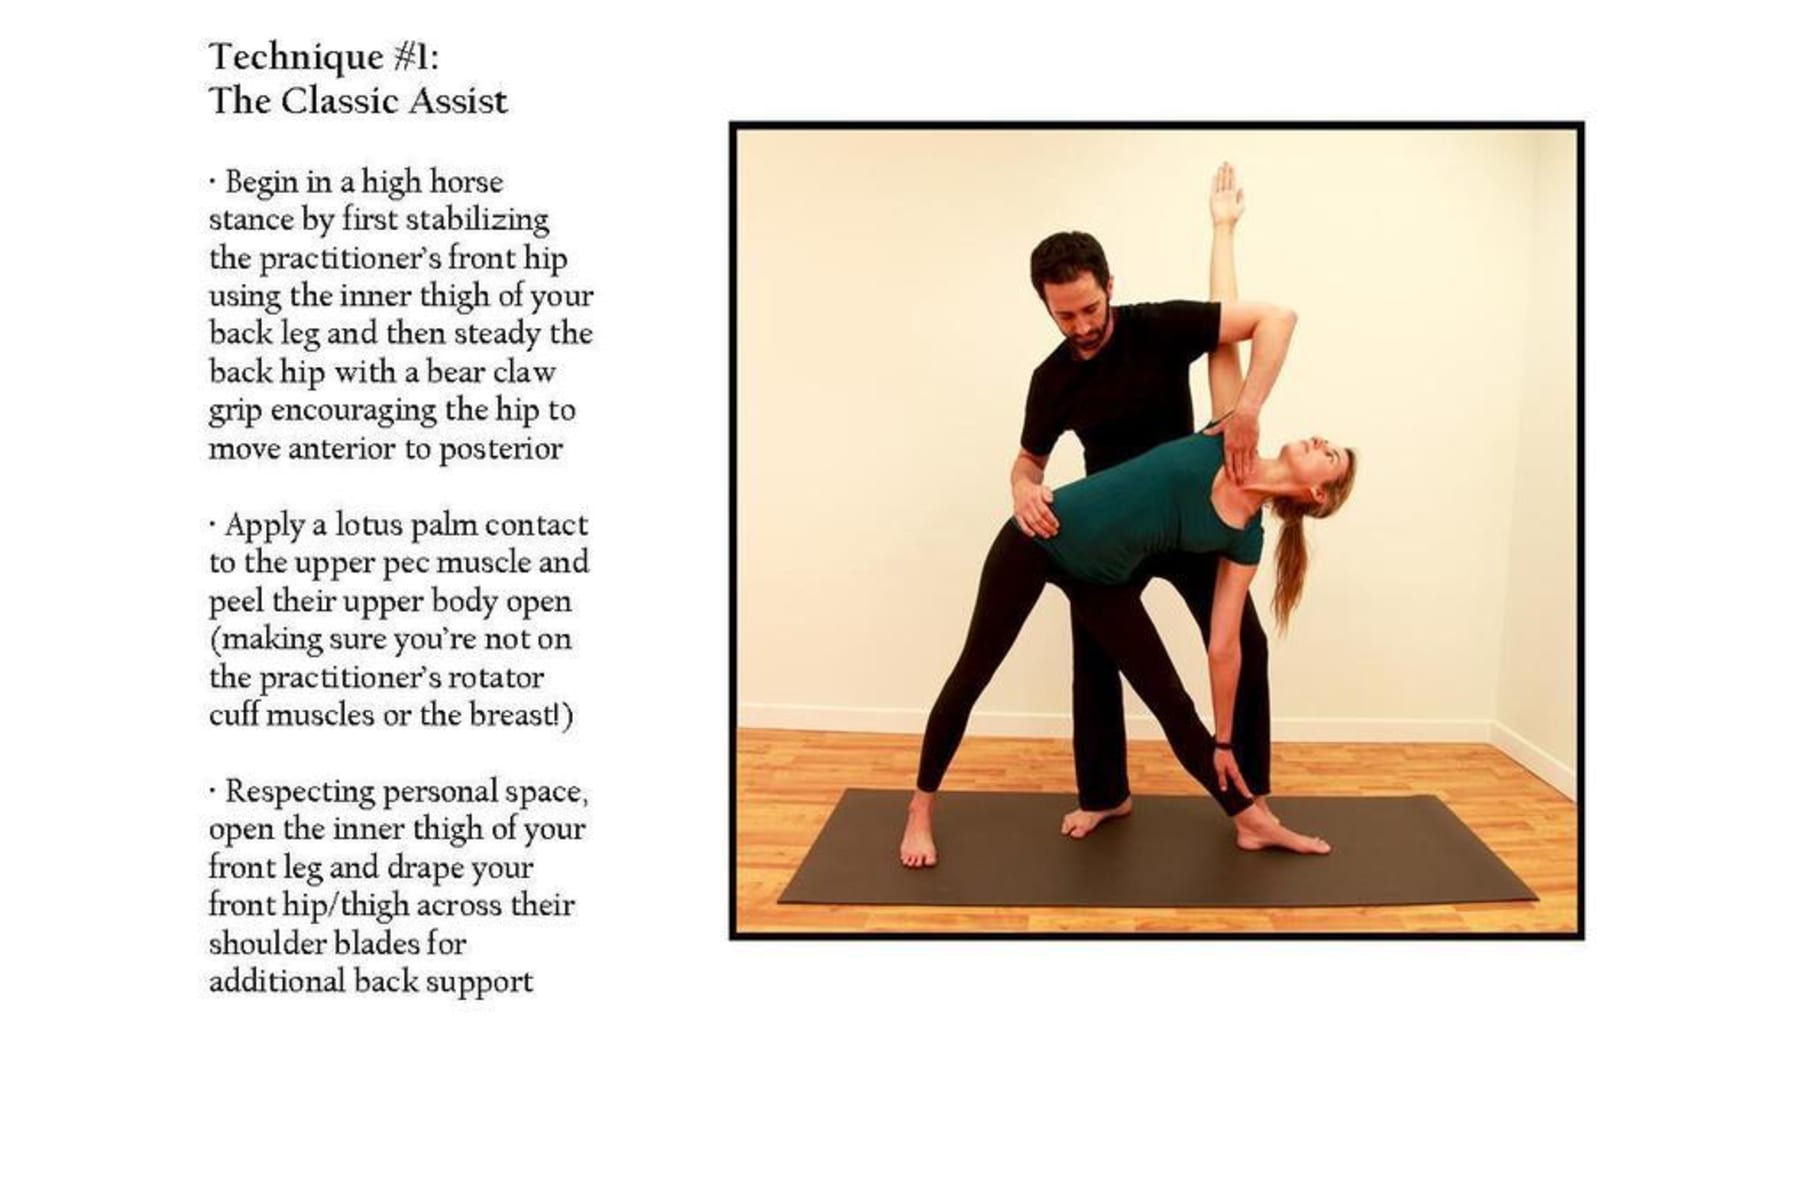 The Art of Adjustments: Understanding Physical Assists in Yoga Teaching